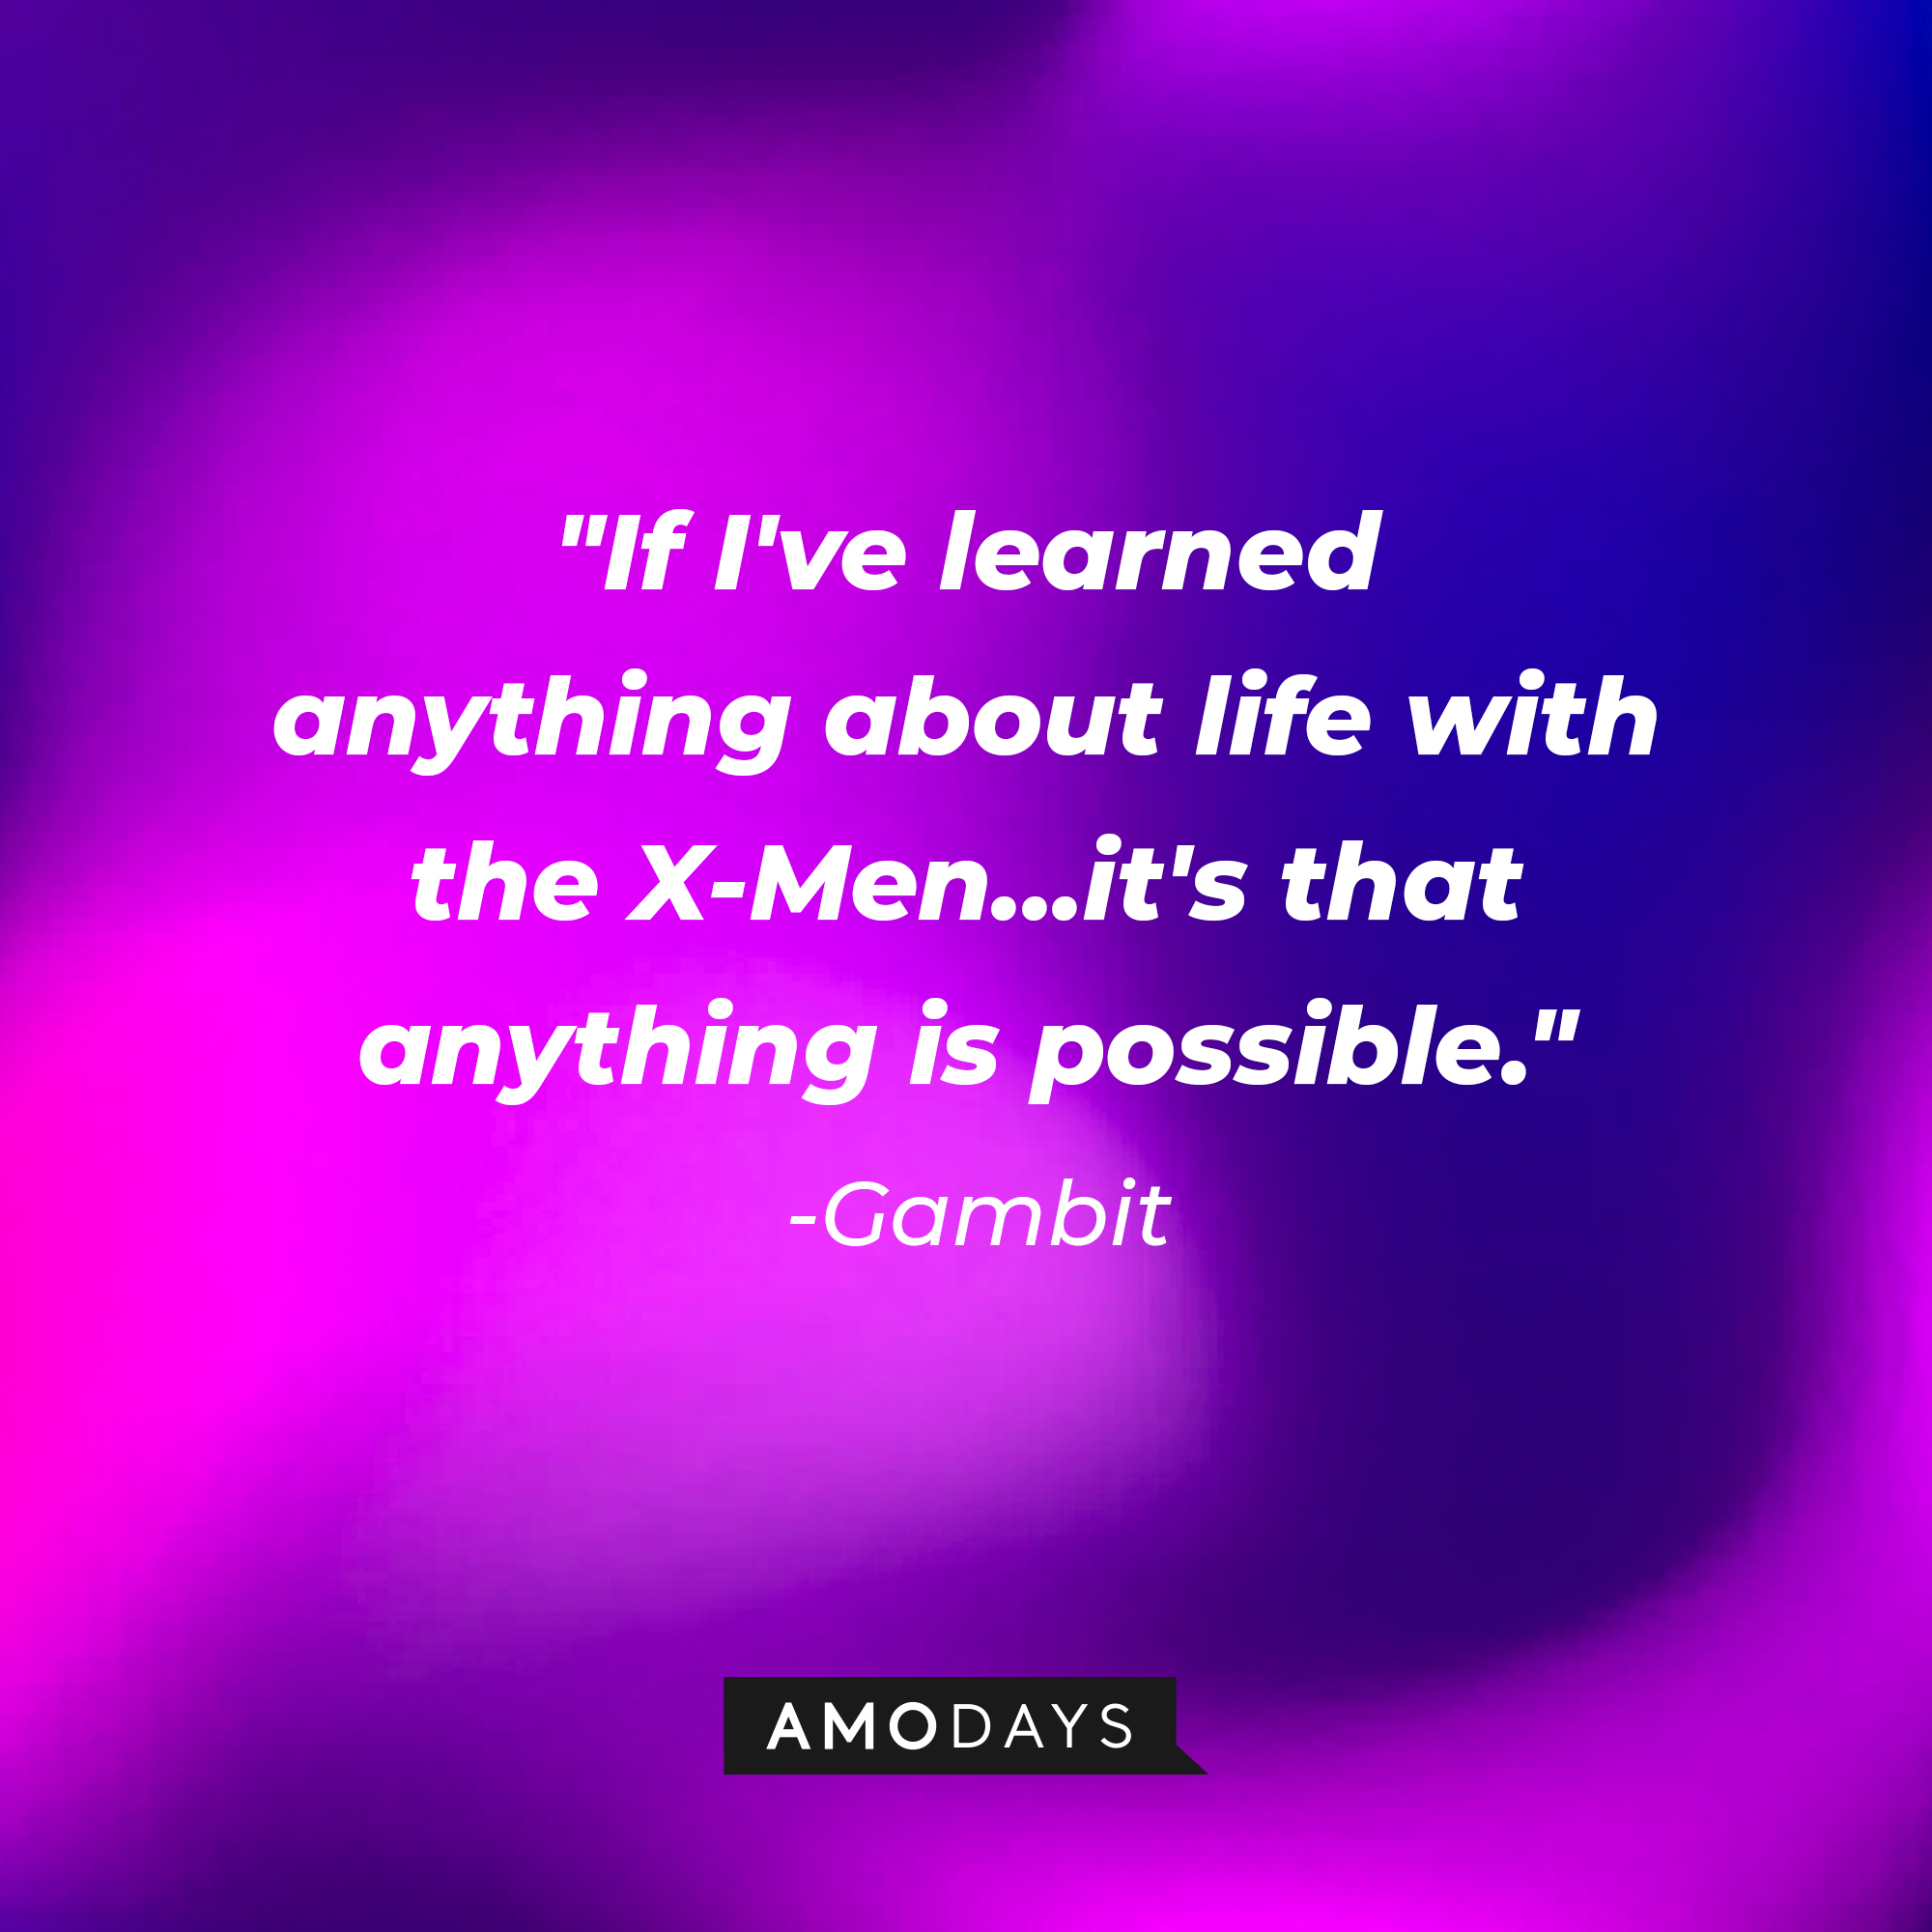 Gambit’s quote: "If I've learned anything about life with the X-Men...it's that anything is possible."  | Source: AmoDays